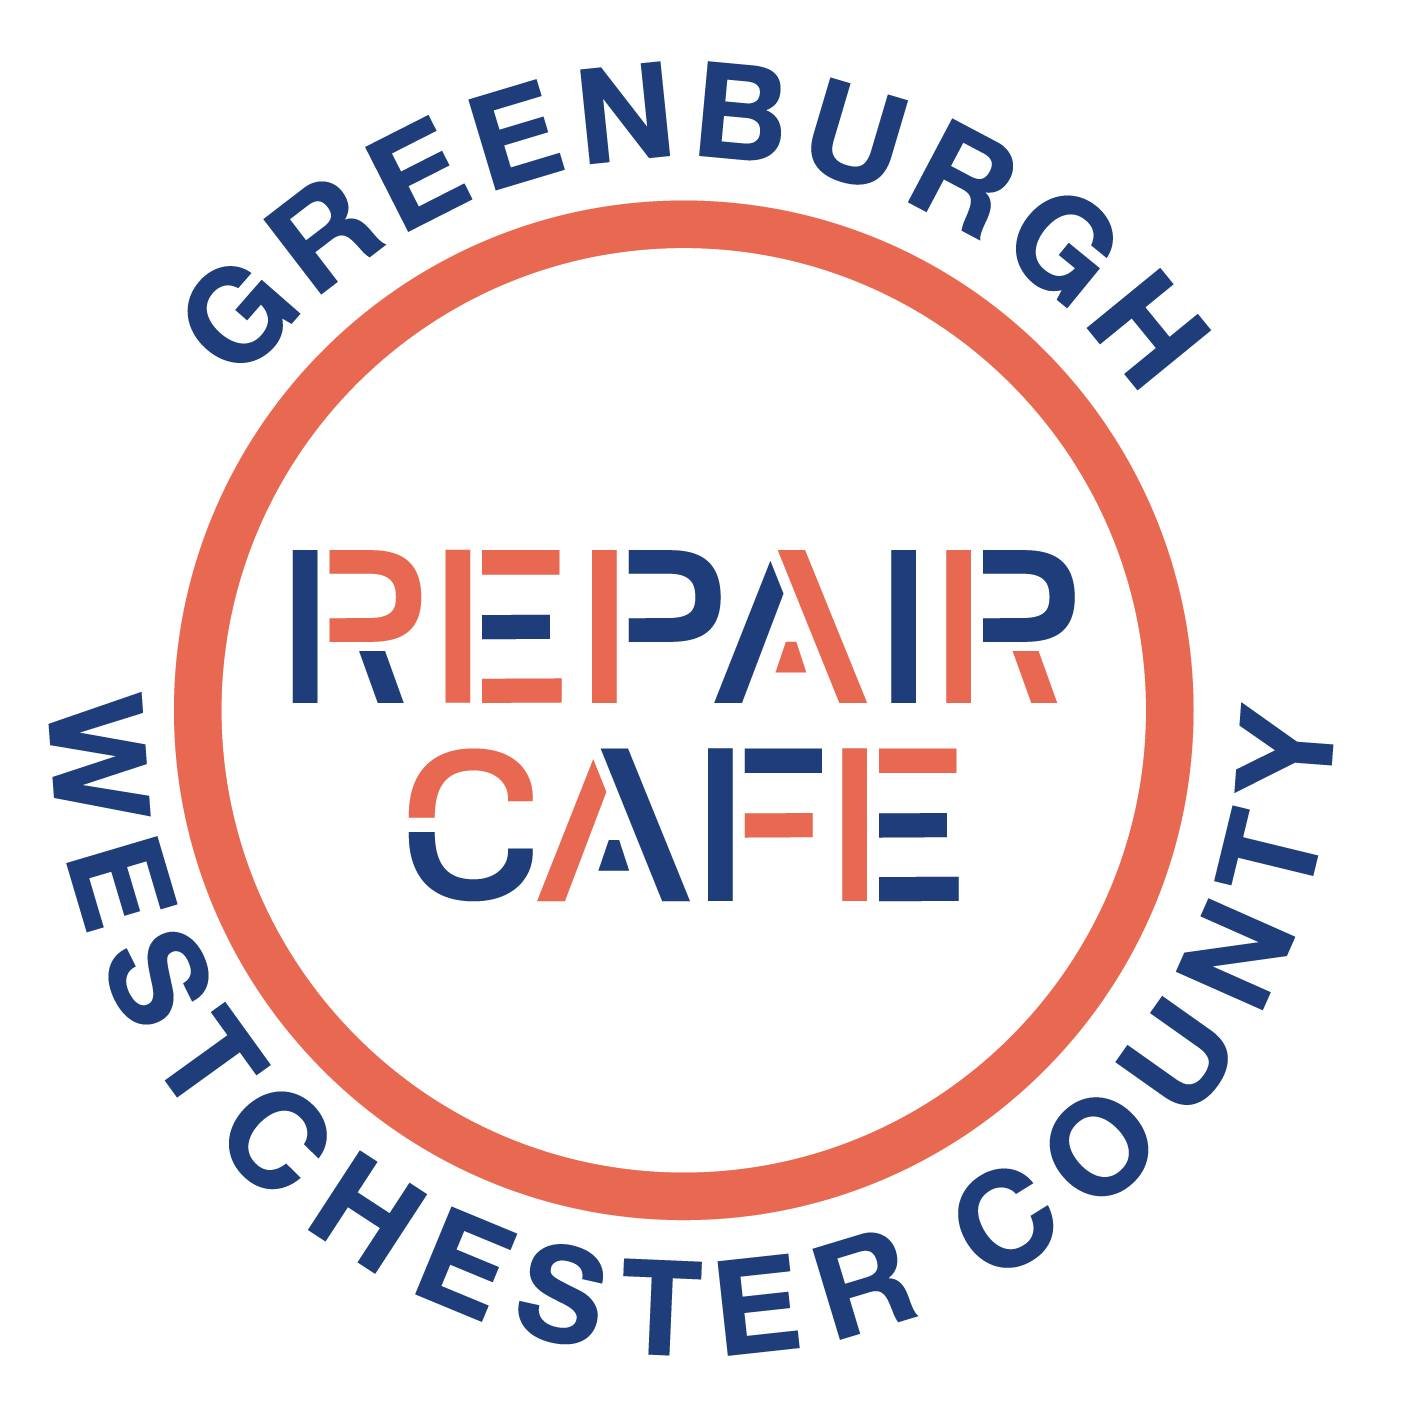 📹 Solving Problems: Greenburgh Repair Cafe! 📹

We're getting pretty excited down here in Westchester for the first Greenburgh Repair Cafe coming this Saturday from 11-3 at the Theodore D. Young Community Center (TDYCC). Town of Greenburgh Superviso